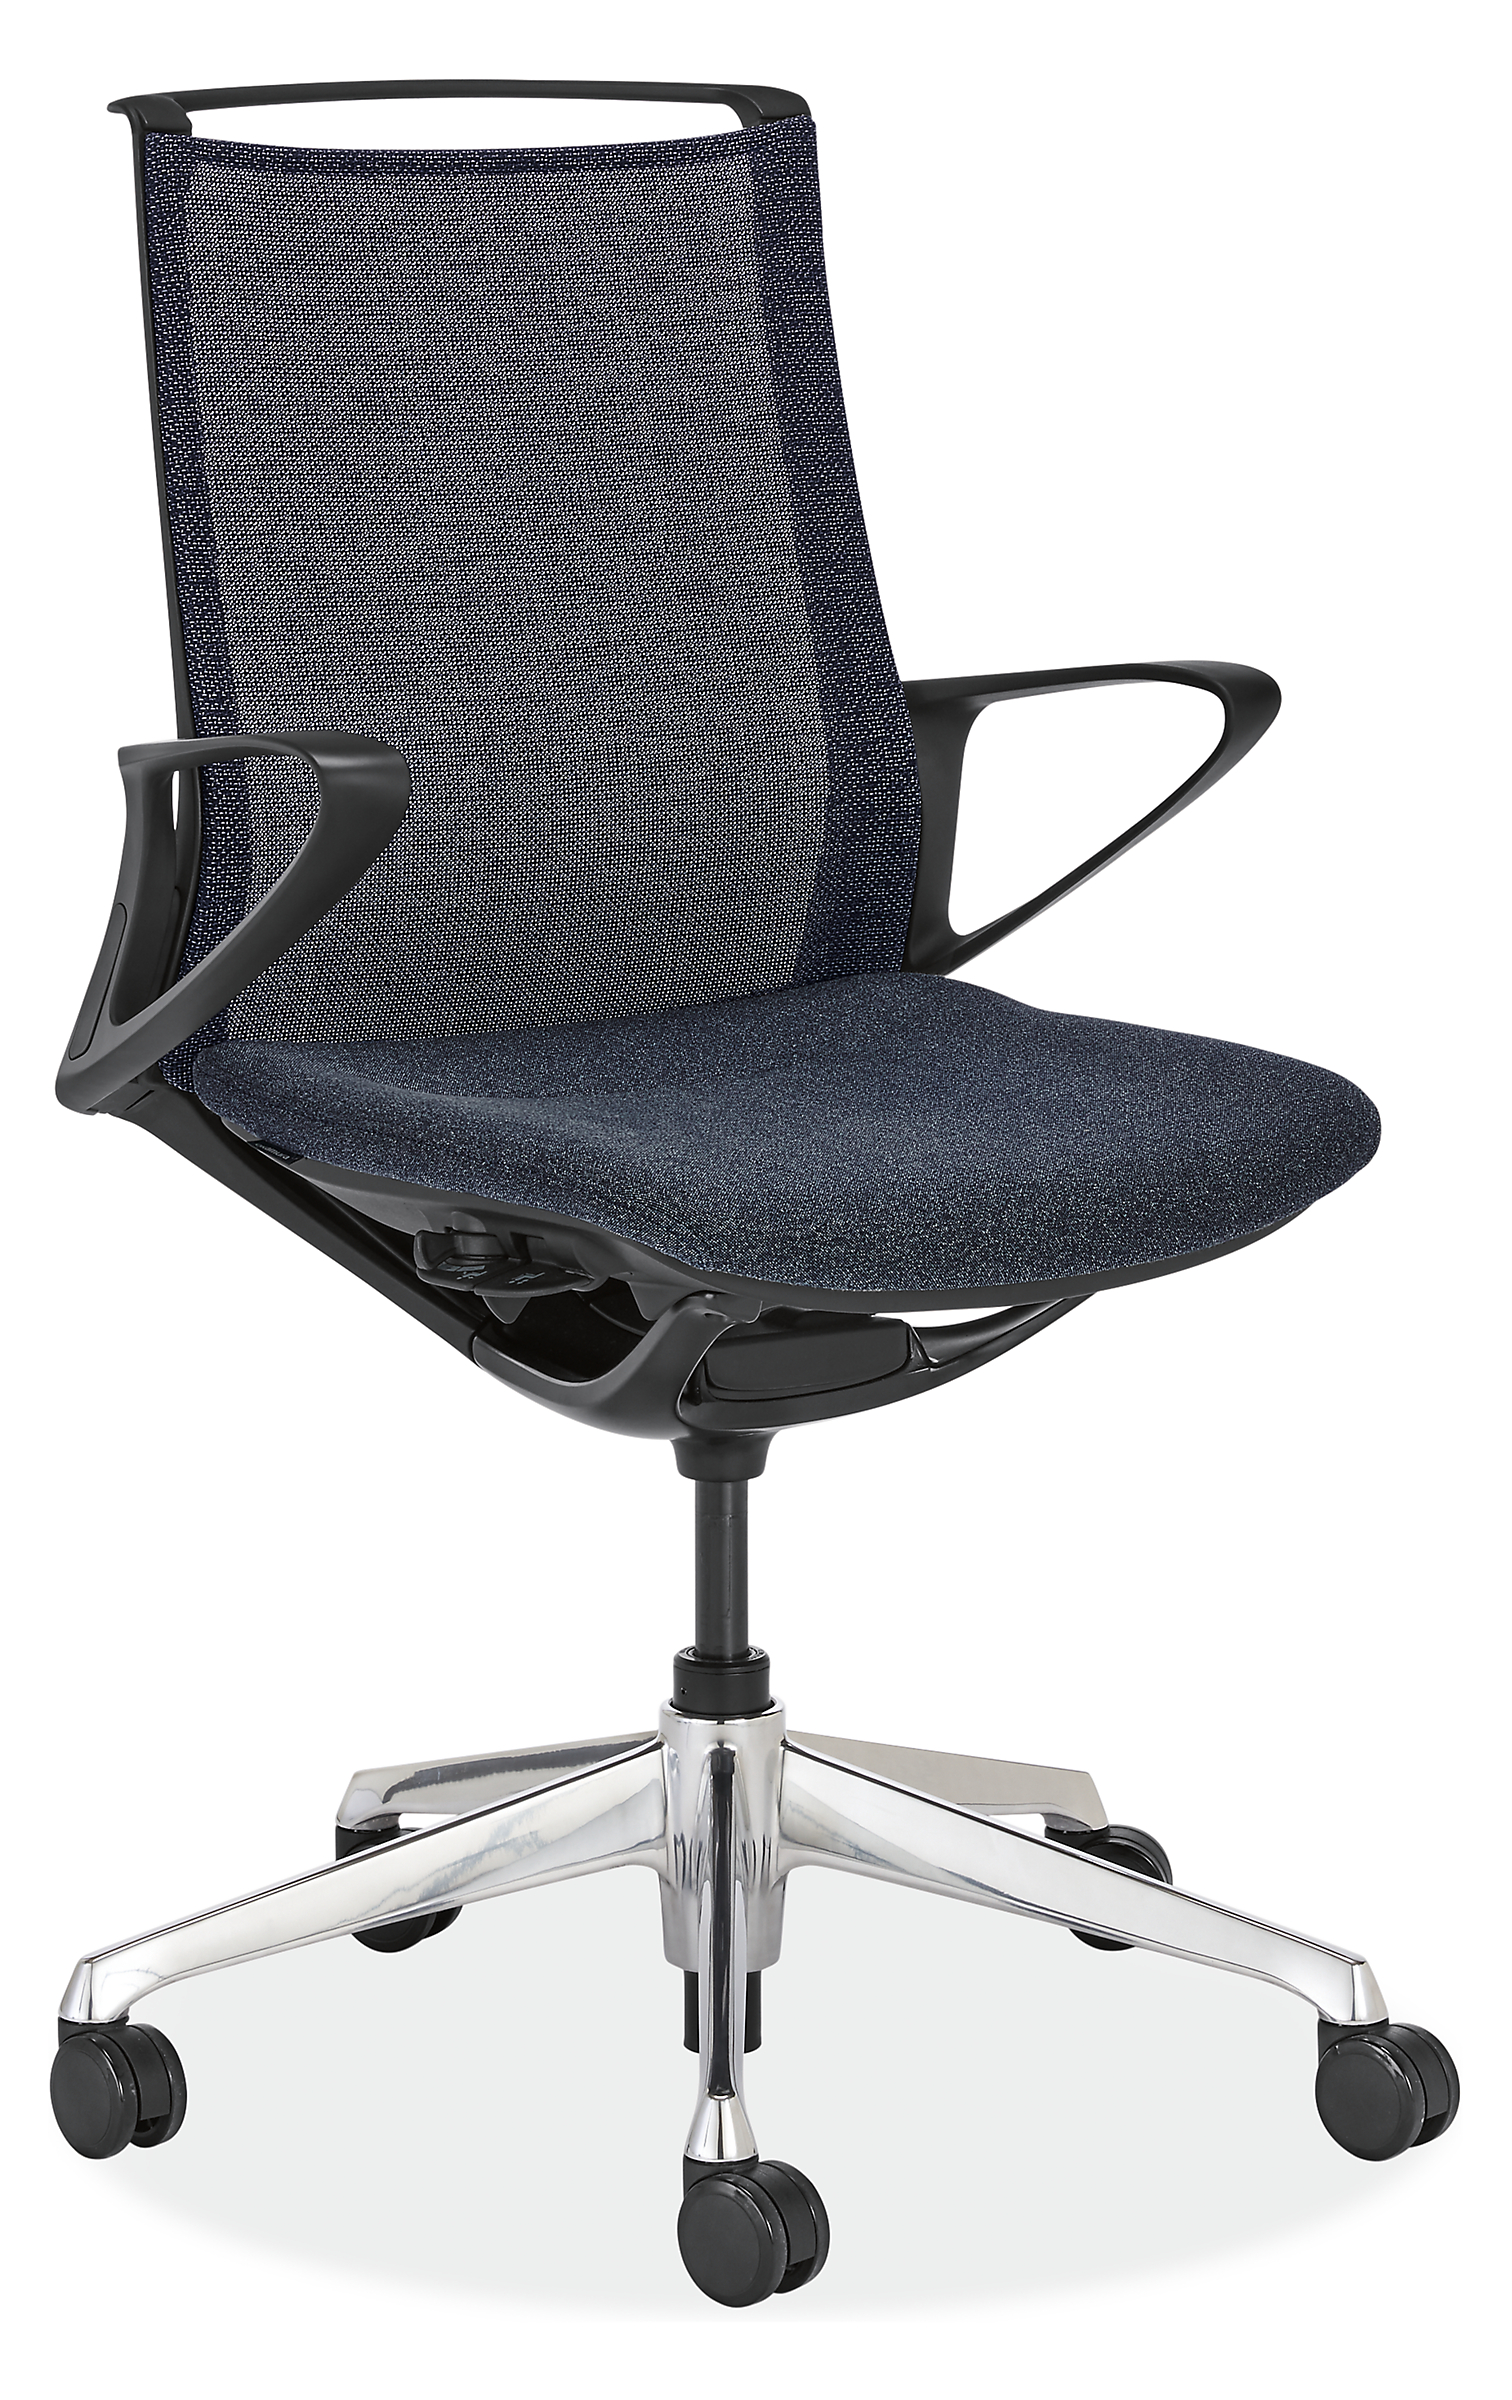 Plimode® Office Chair in Black with Ink Interlock Mesh